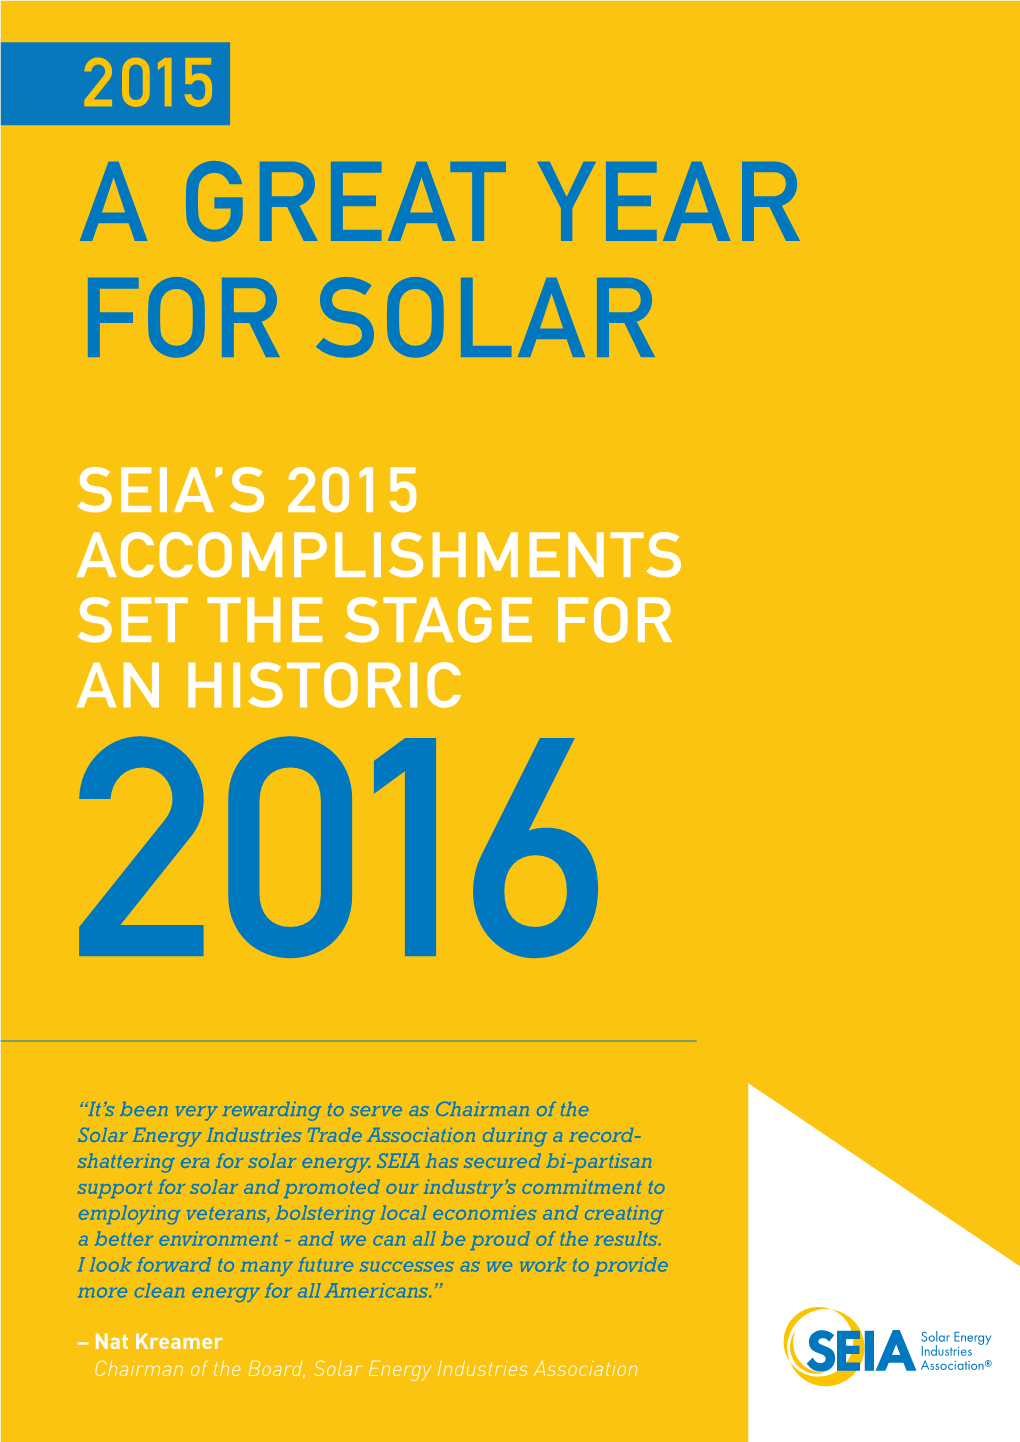 2015 a Great Year for Solar